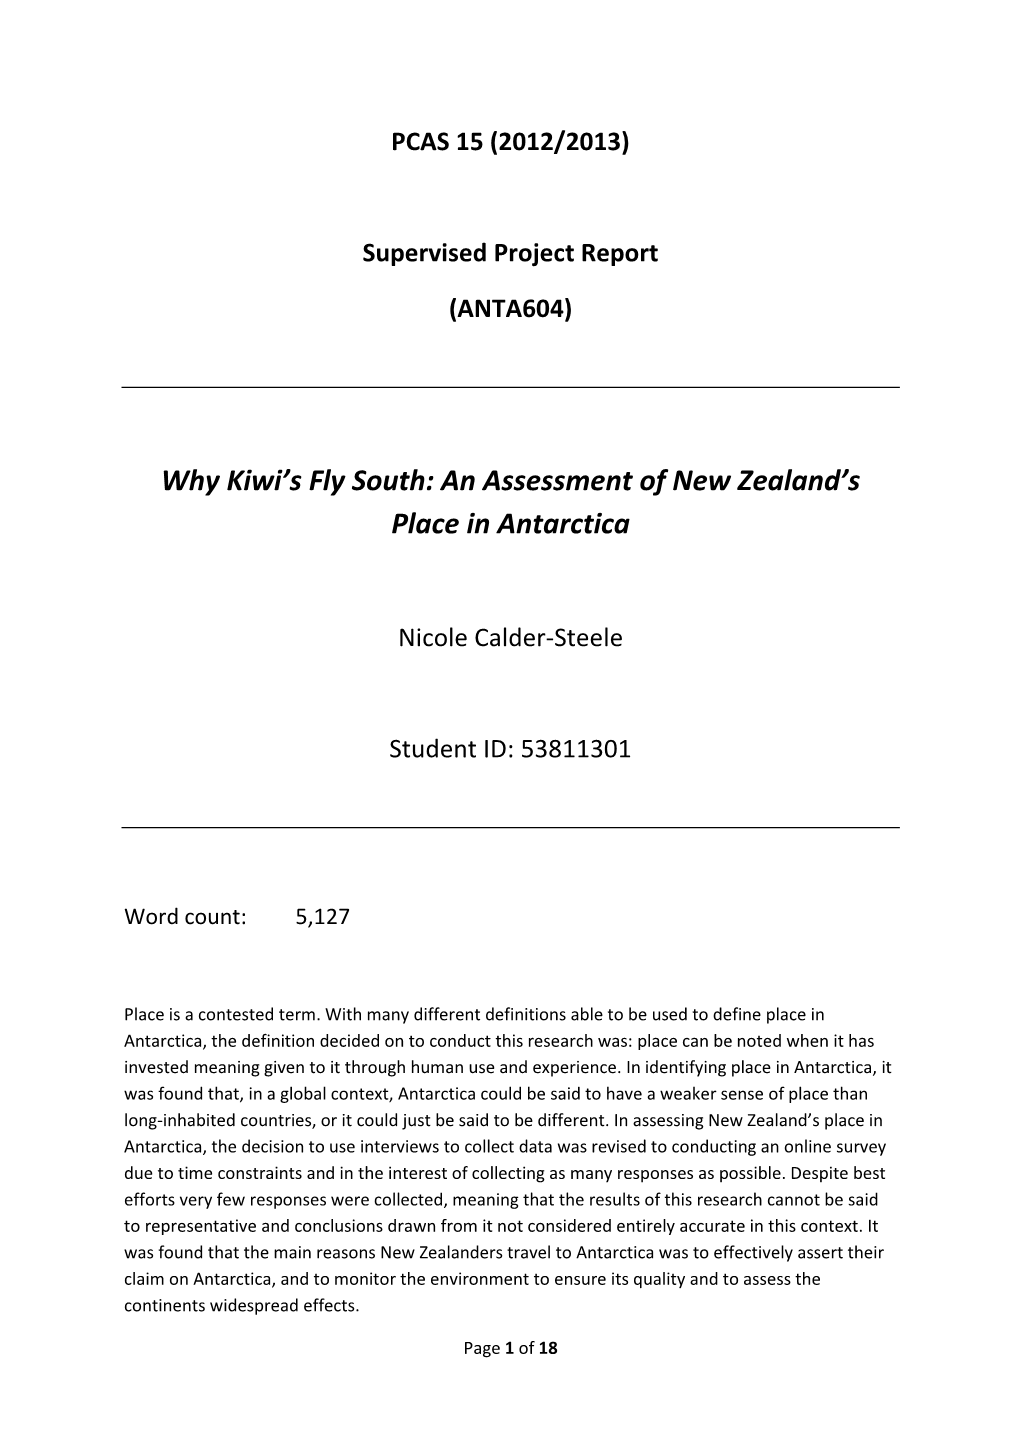 Why Kiwi's Fly South: an Assessment of New Zealand's Place in Antarctica